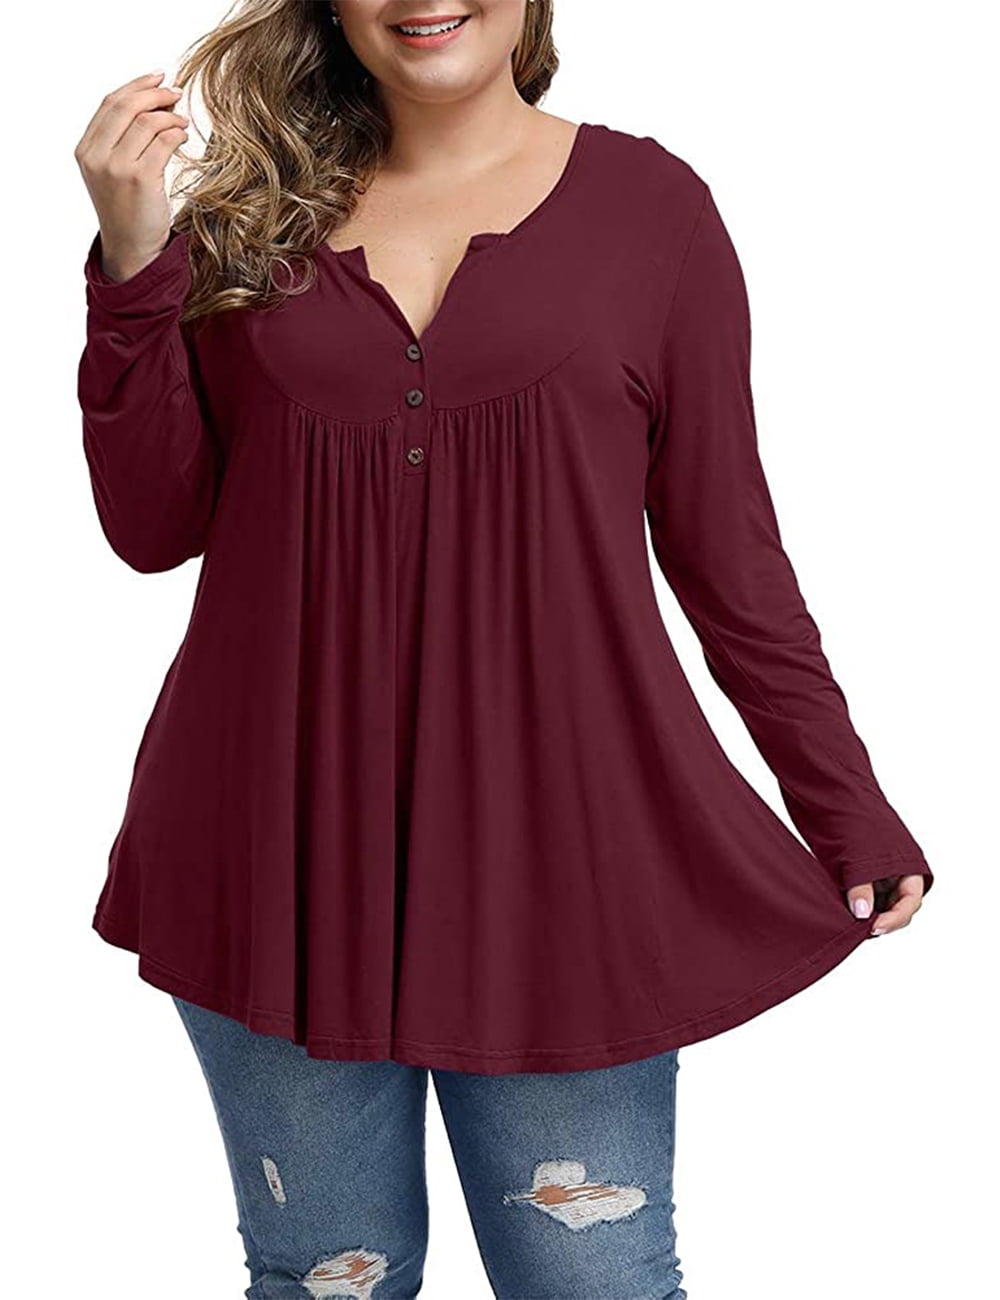 VISLILY Womens Plus Size Tops Buttons V Neck Henley Shirt Long Sleeve Raglan Casual Tees